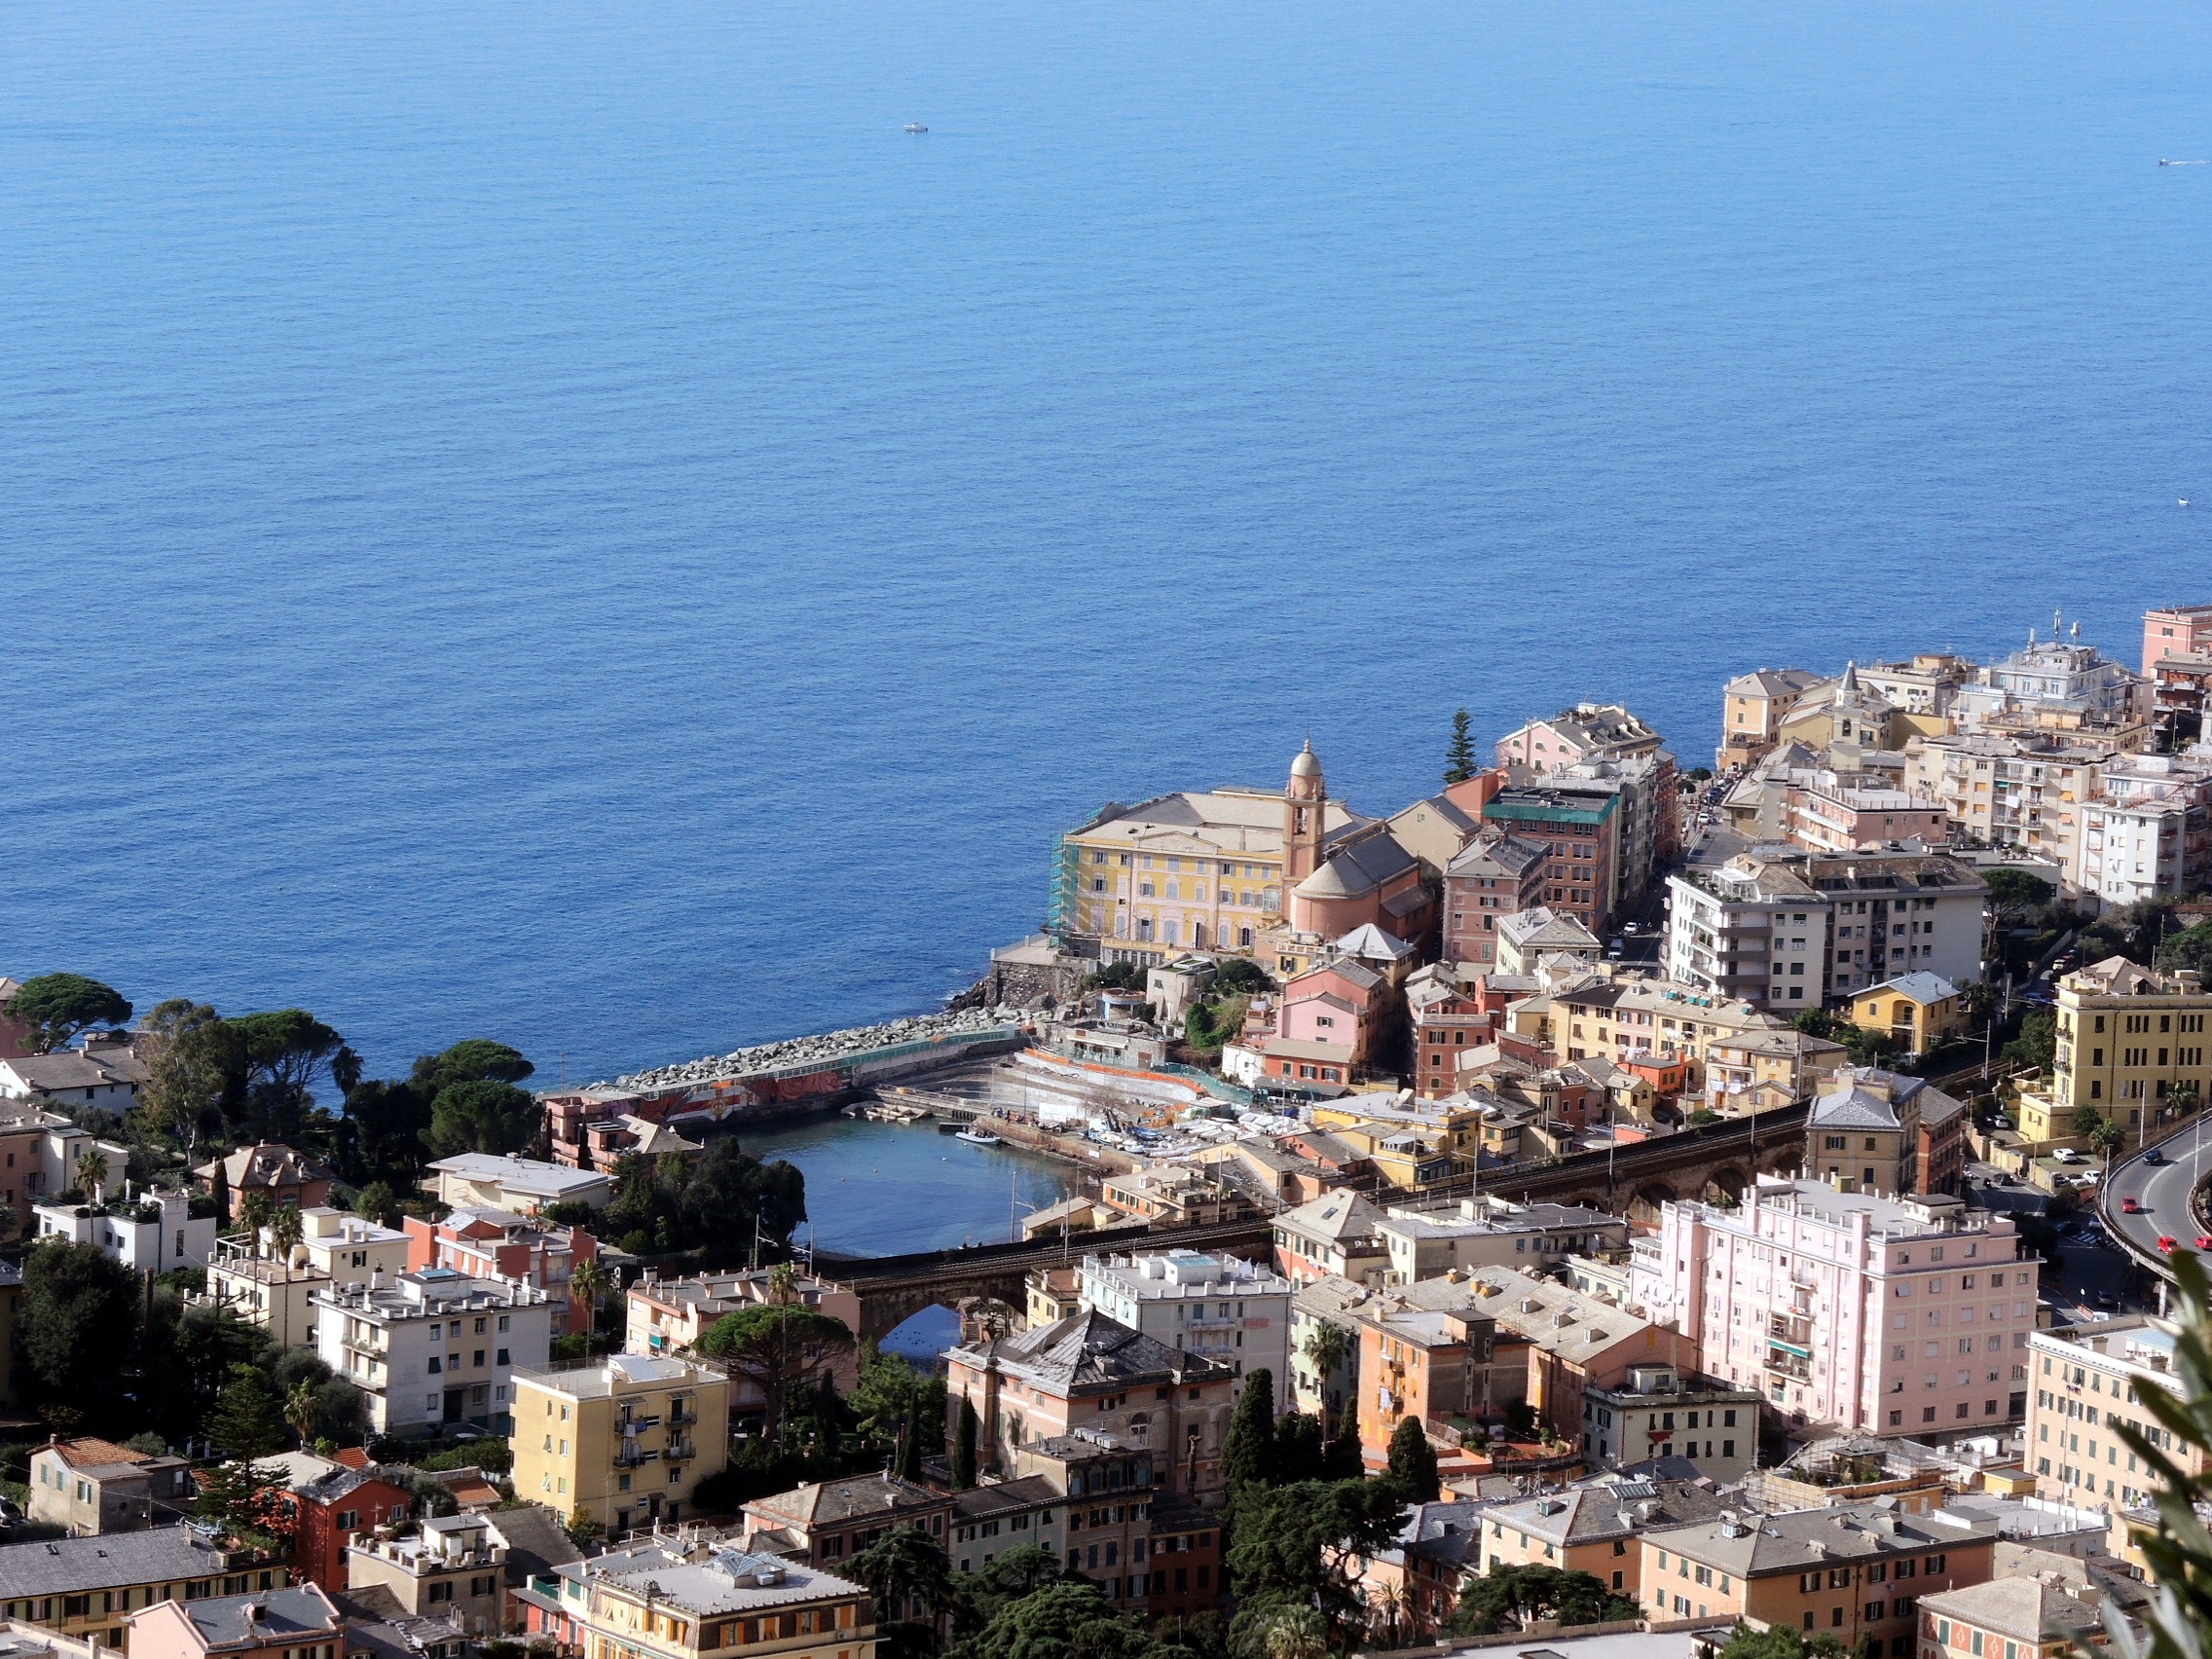 Nervi as seen from Sant'Ilario...